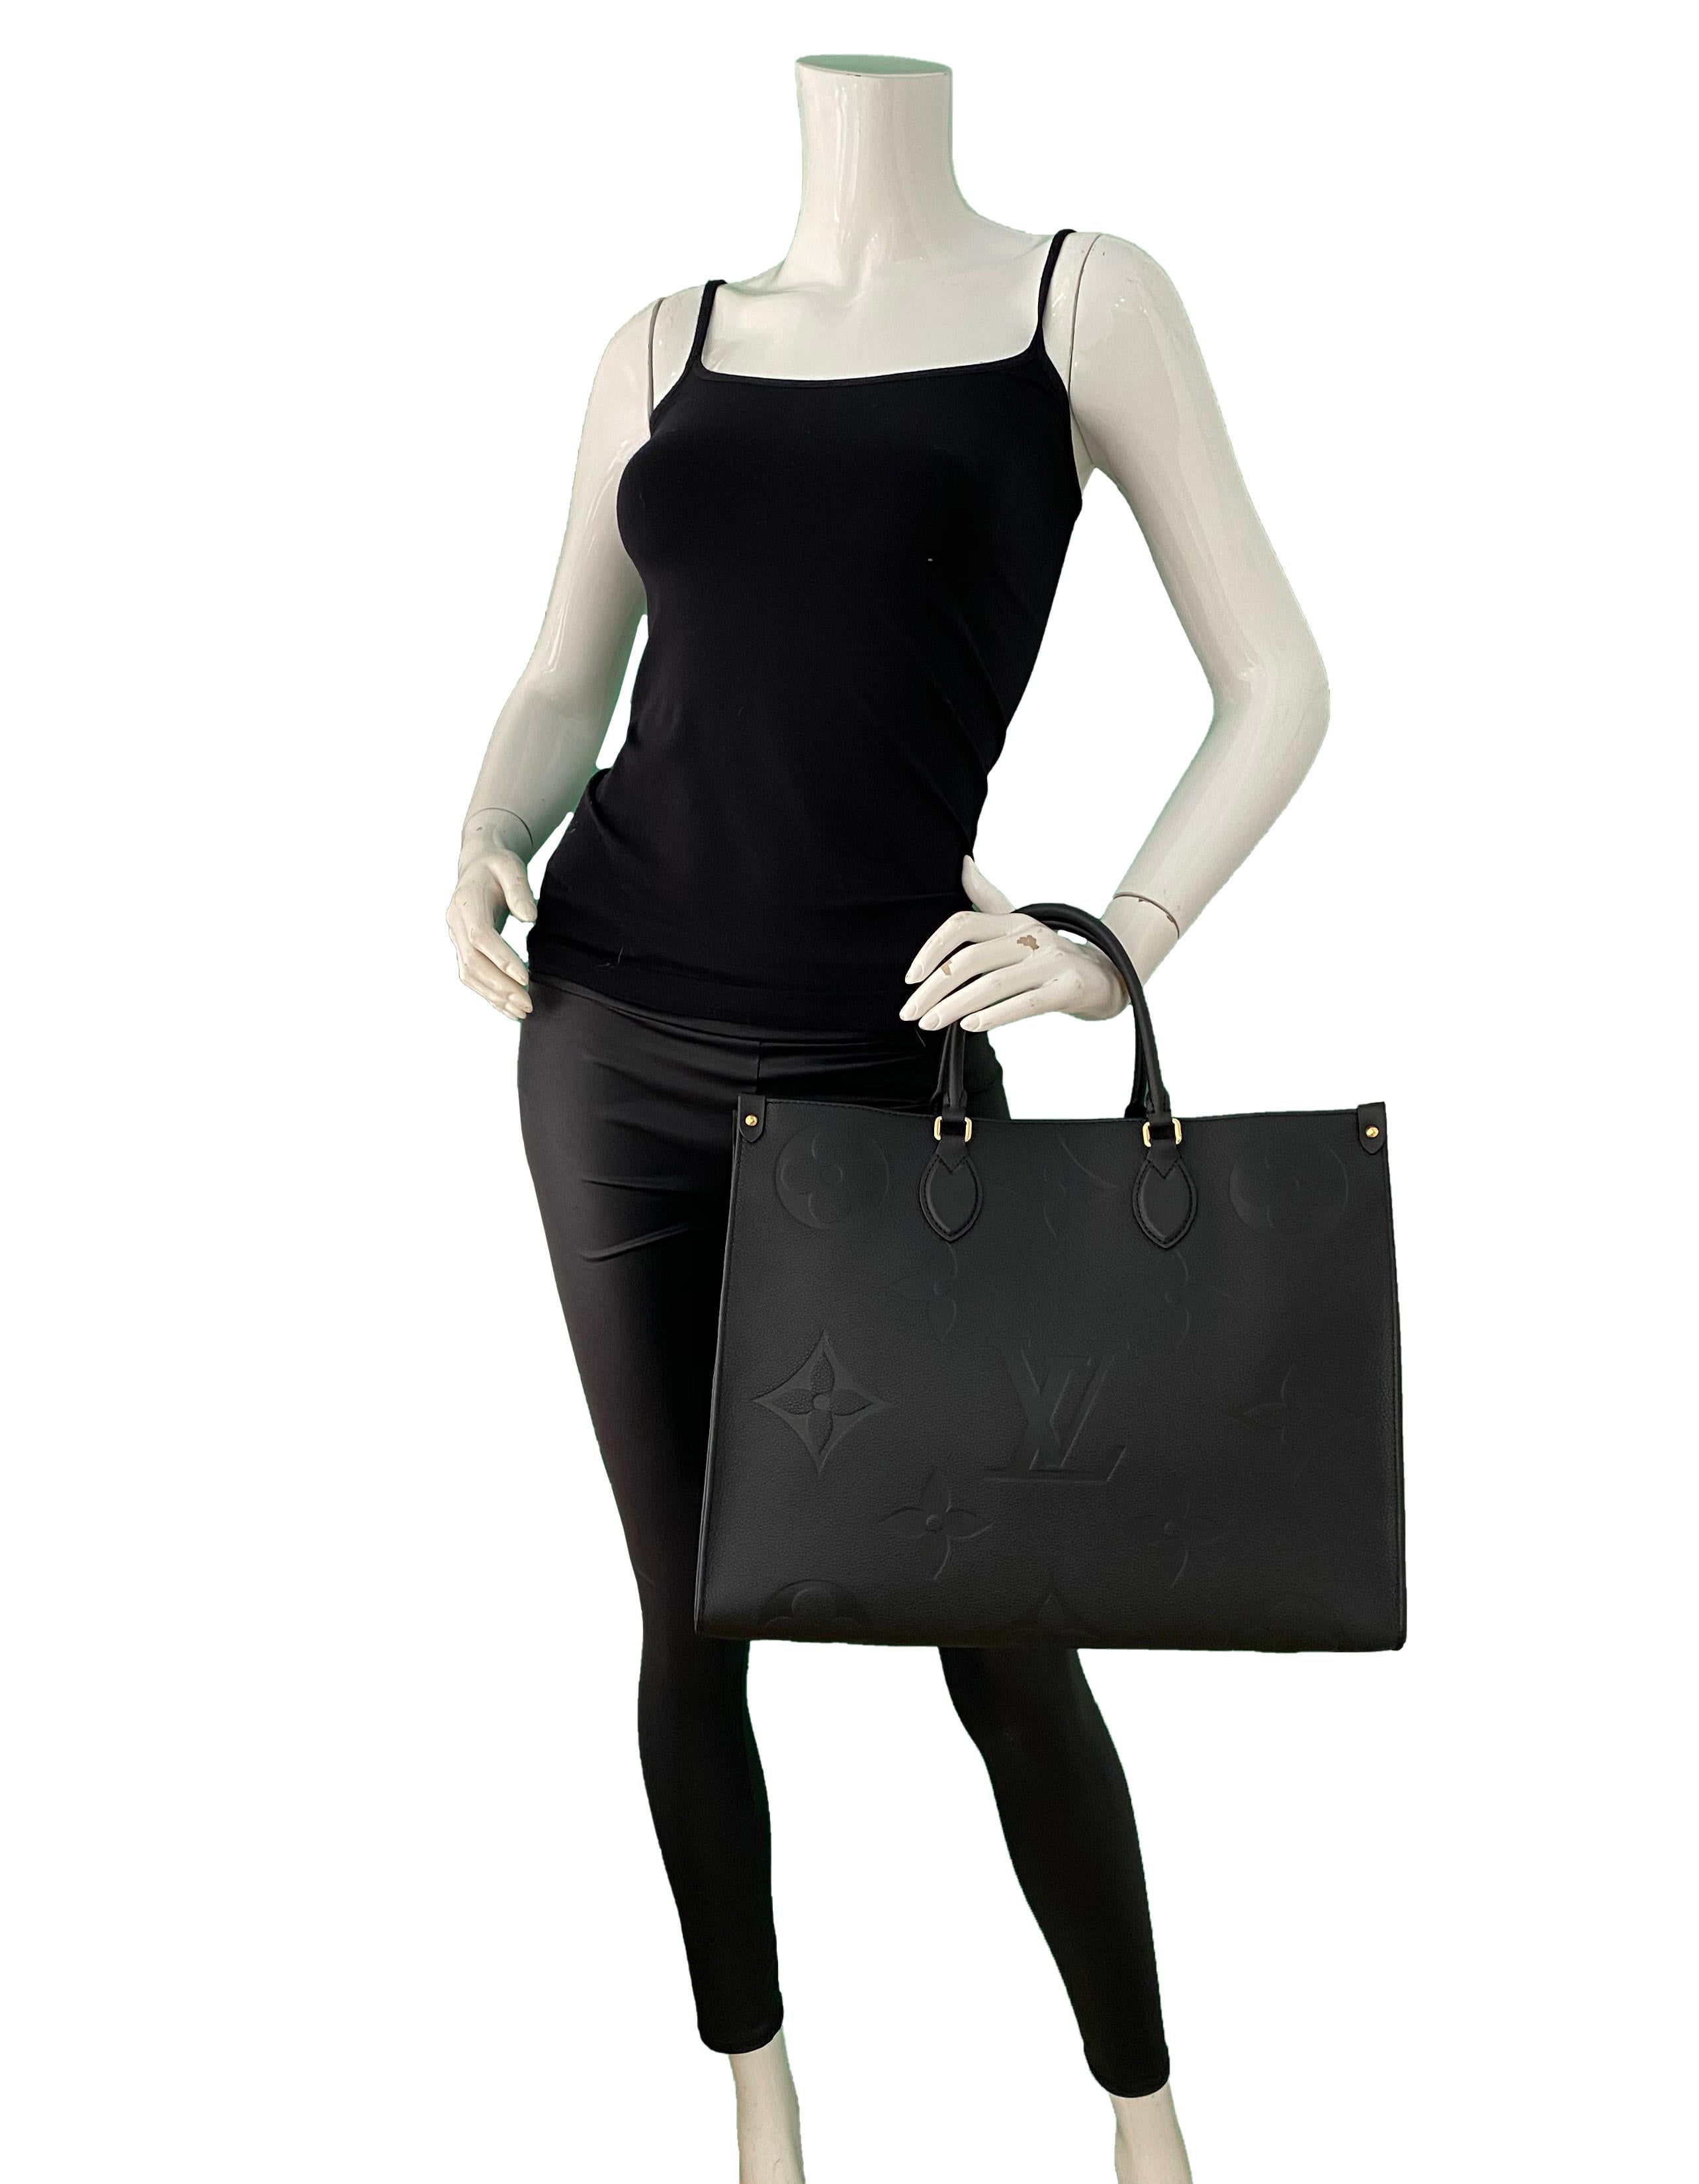 Louis Vuitton Black Monogram Empreinte Leather Giant Onthego GM Tote Bag. M44925.

Made In: France
Year of Production: 2020
Color: Black
Hardware: Goldtone
Materials: Cowhide leather
Lining: Microfiber
Closure/Opening: Open with center hook
Interior